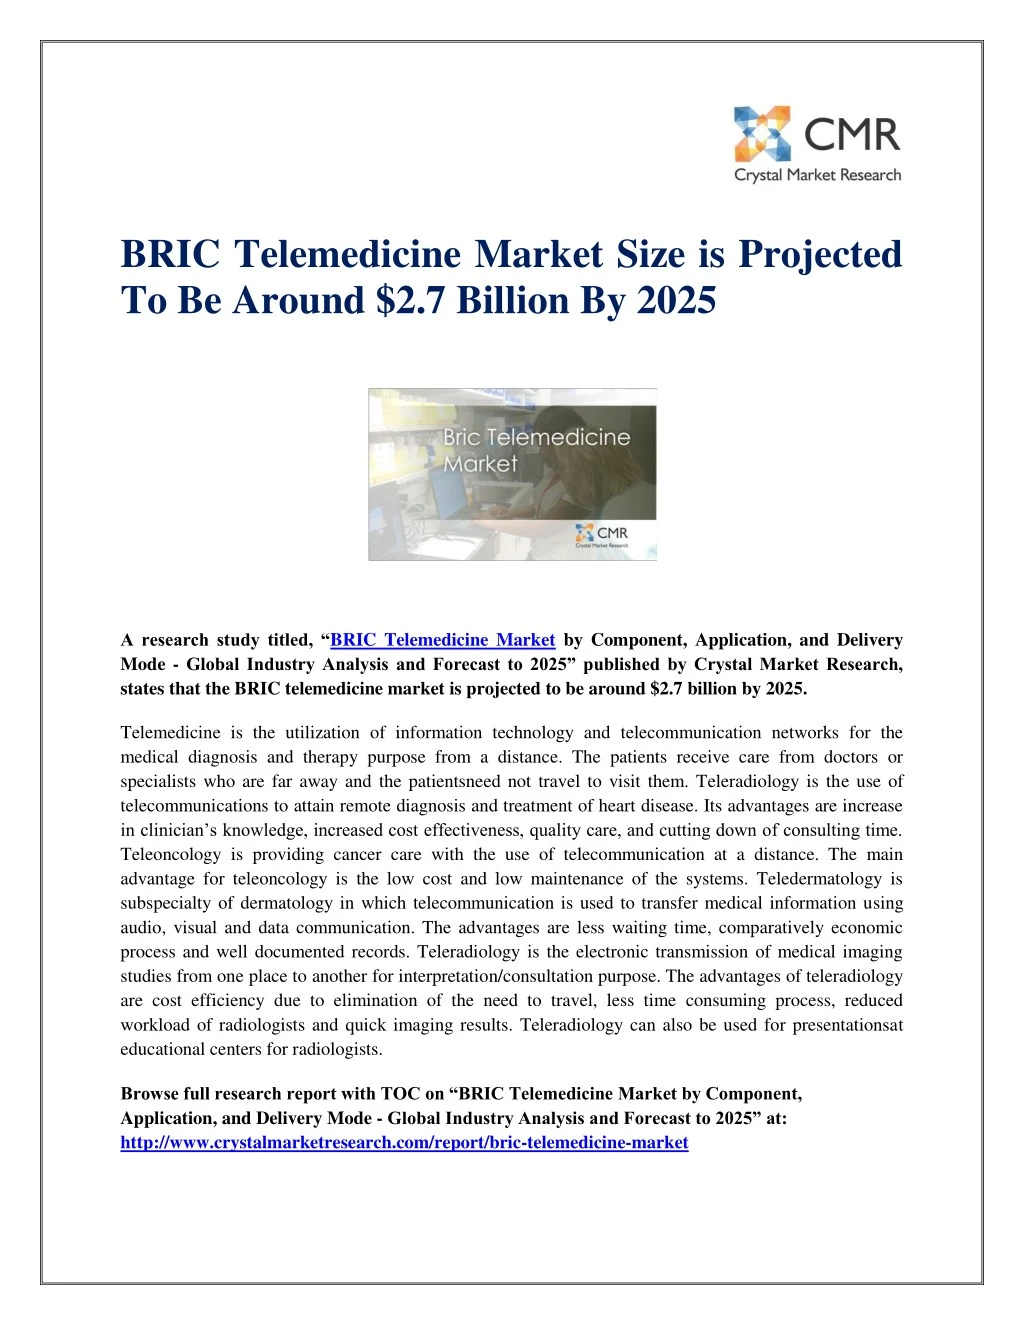 bric telemedicine market size is projected